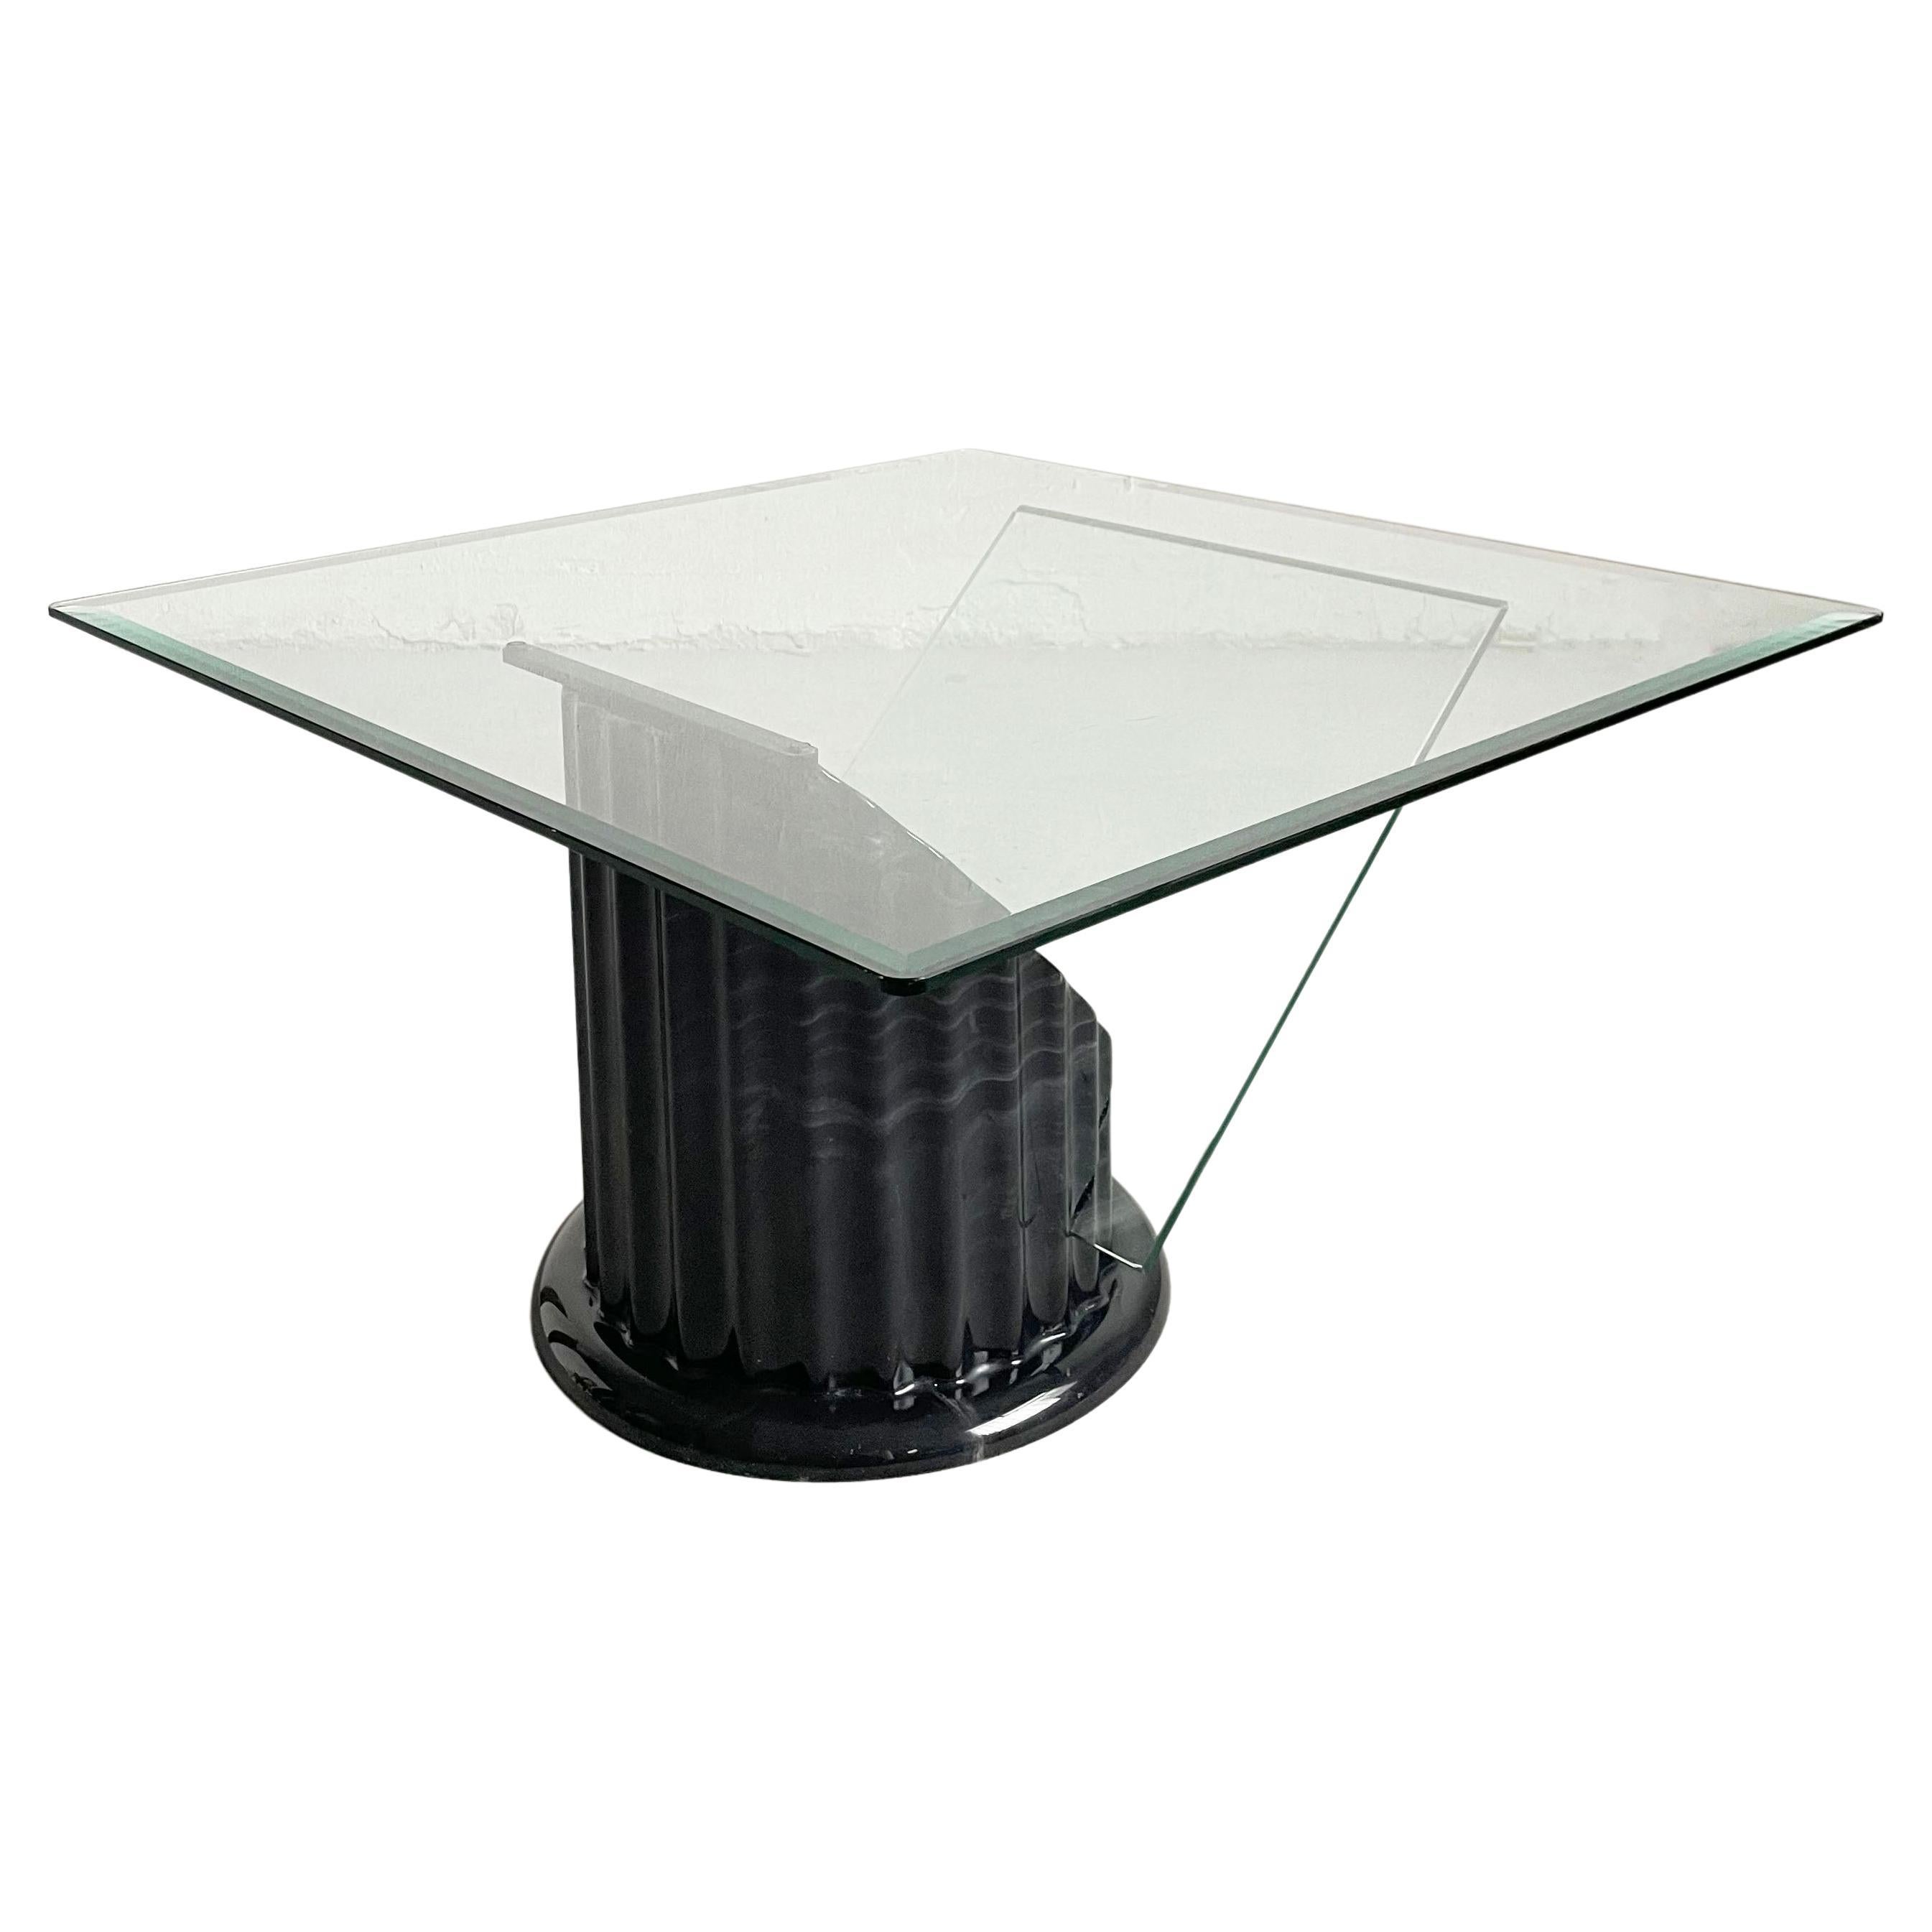 Postmodern Sculptural Coffee Table, Black Faux Marble and Glass, 1980s For Sale